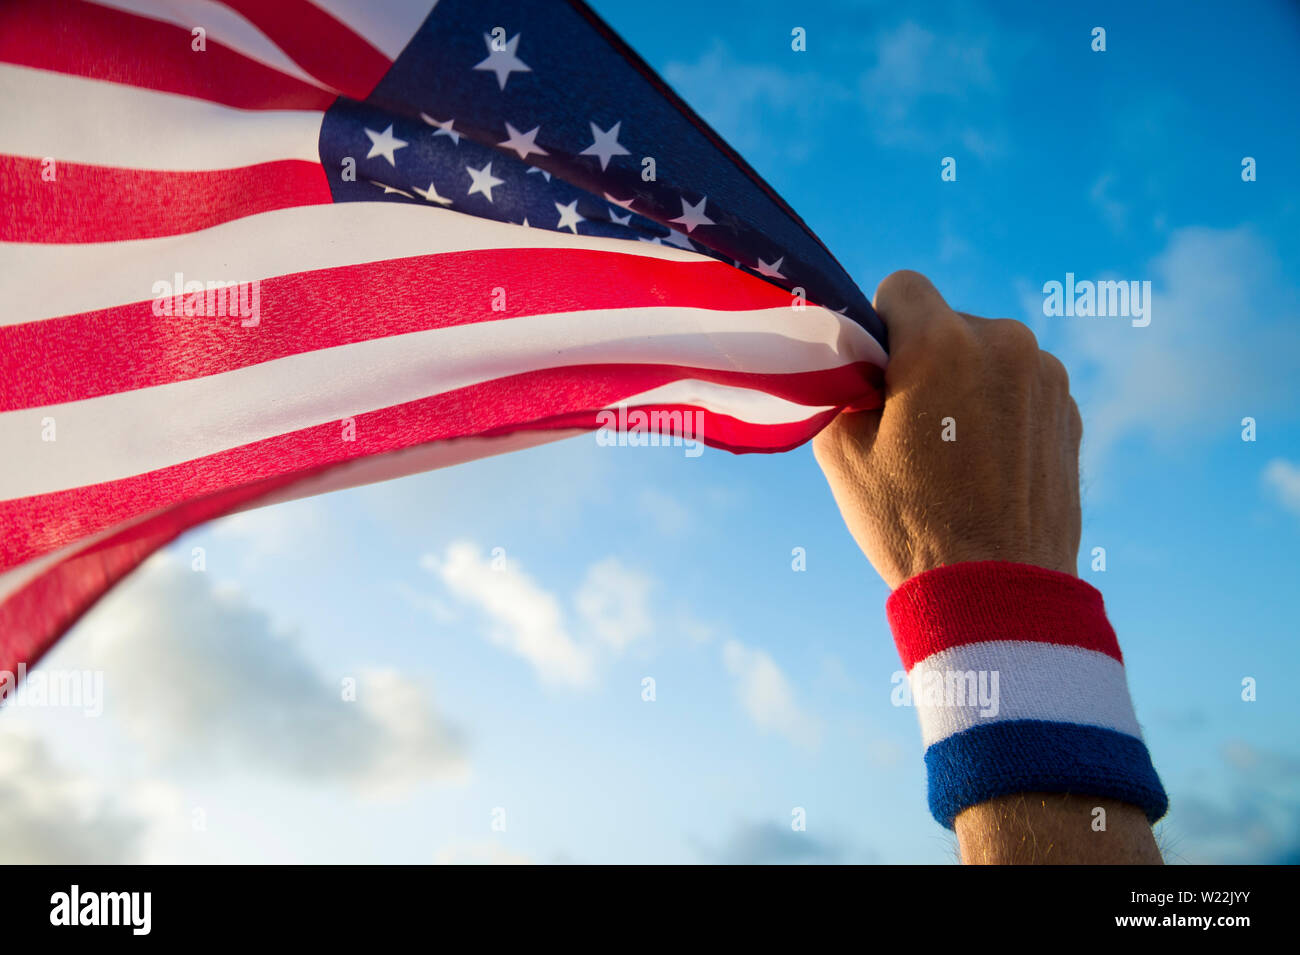 Patriotic hand with USA red, white, and blue wristband holding an American  flag waving in golden sunny blue sky Stock Photo - Alamy